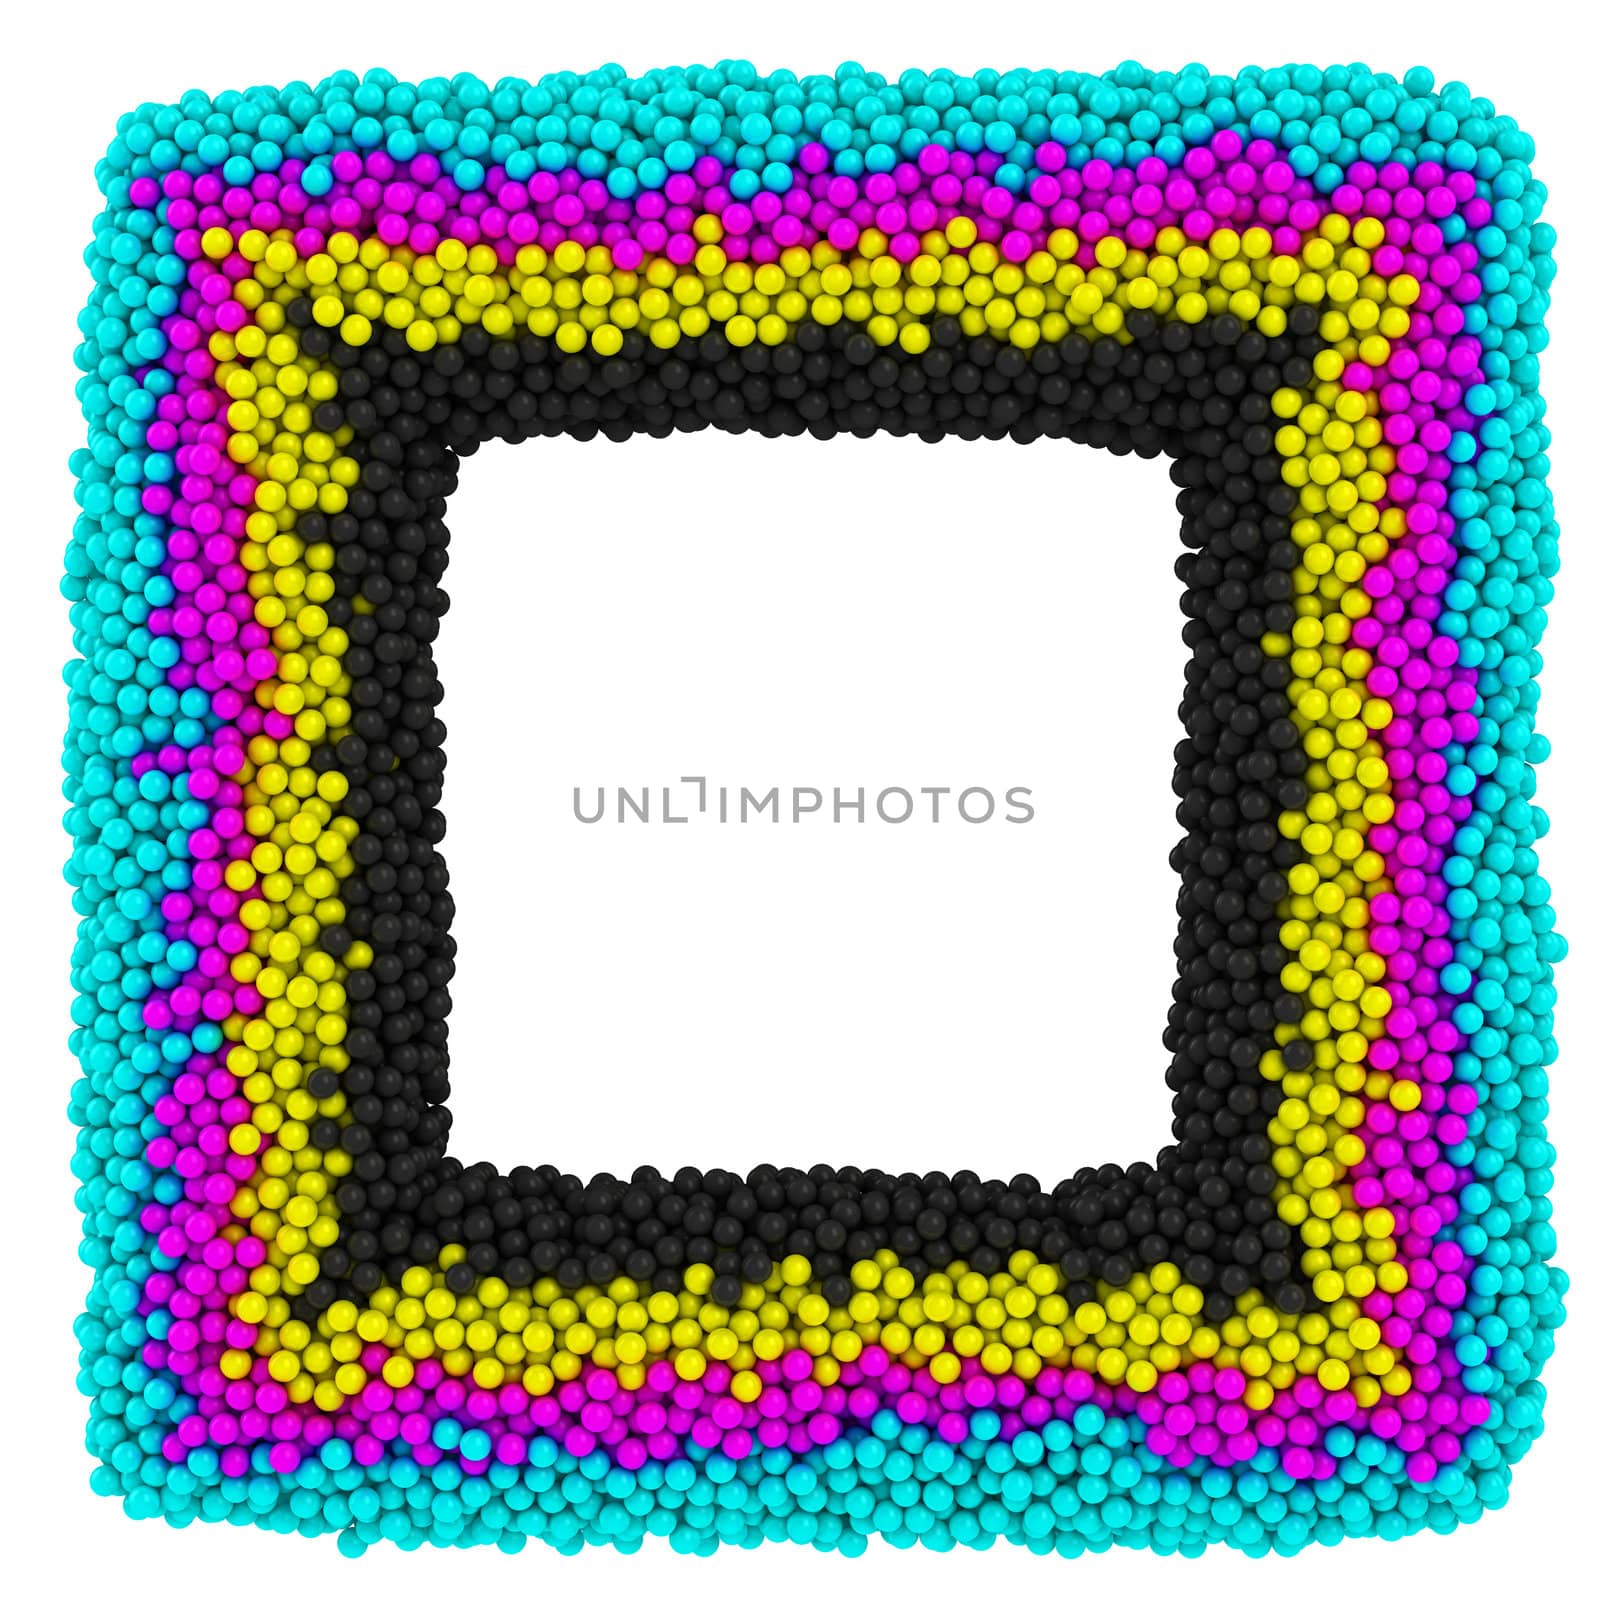 CMYK square frame by timbrk